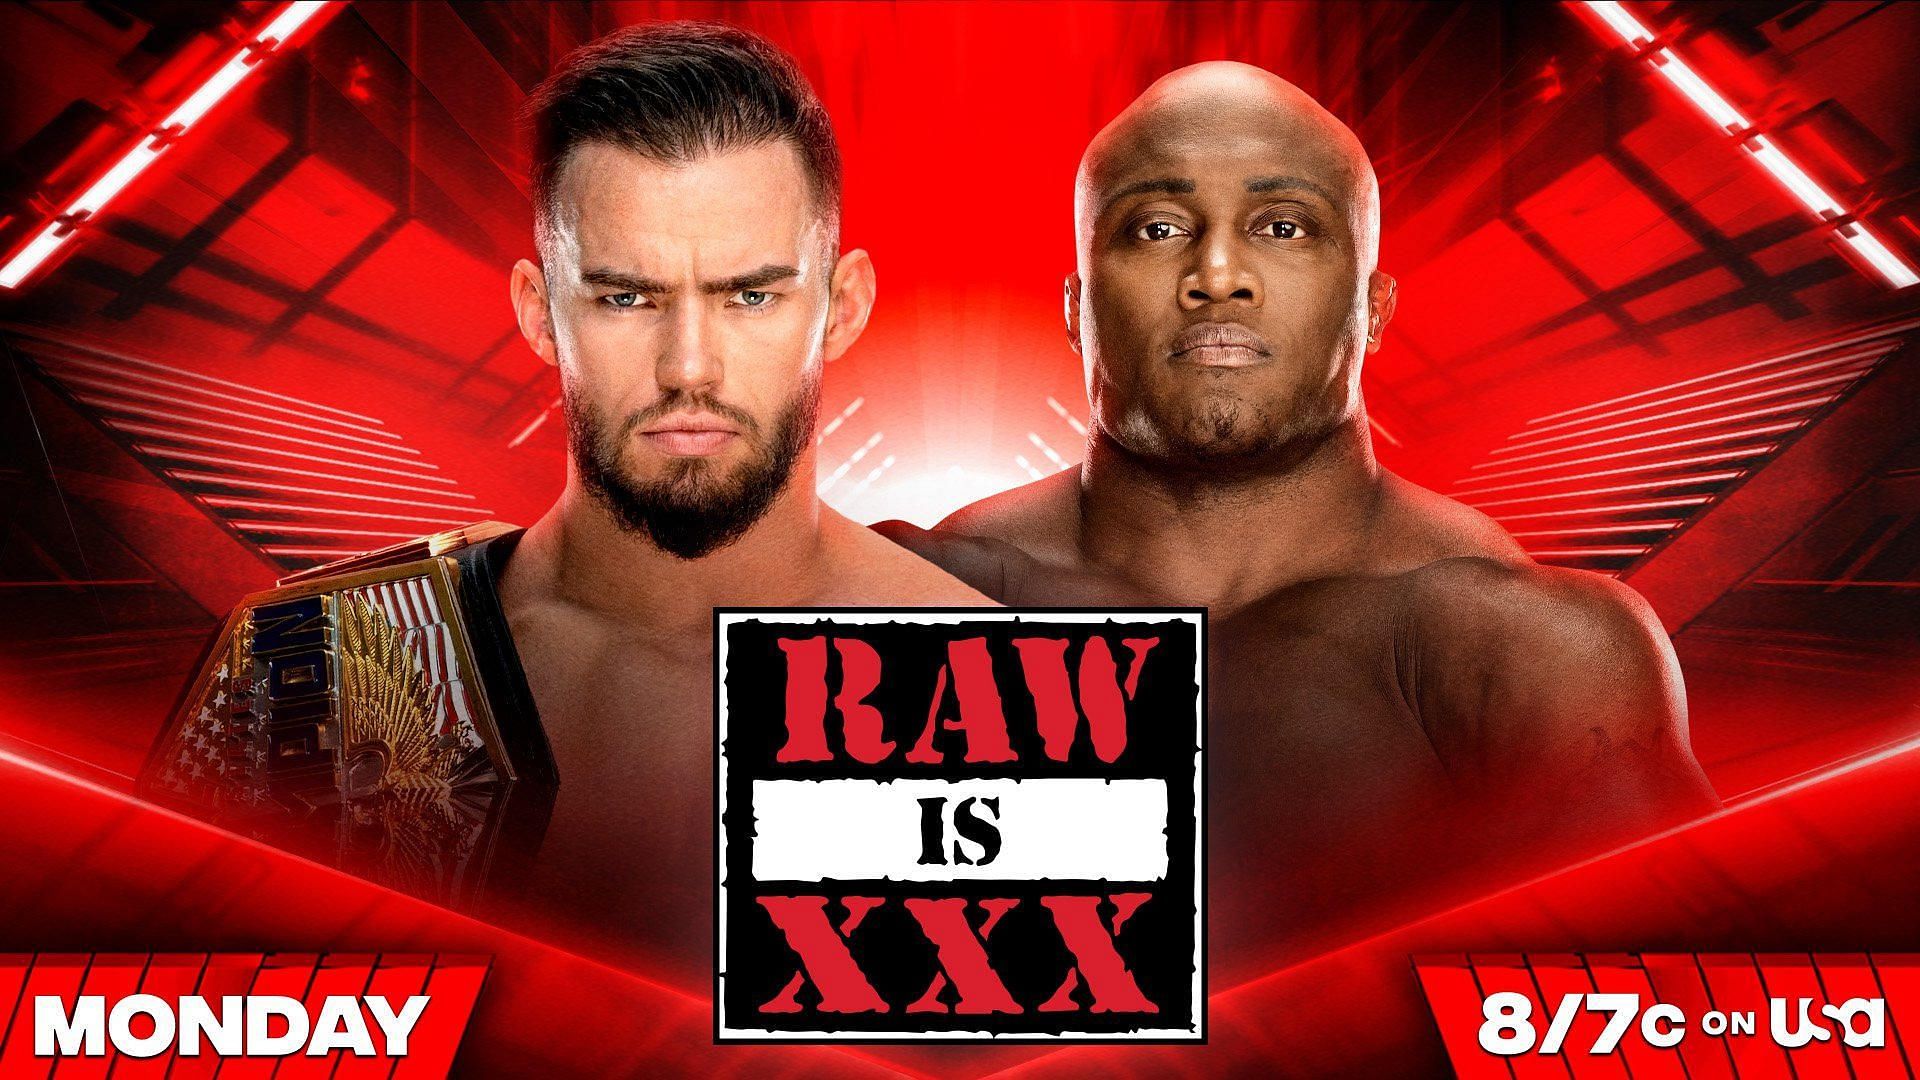 Bobby Lashley looks to become a four-time U.S. Champion at Raw XXX